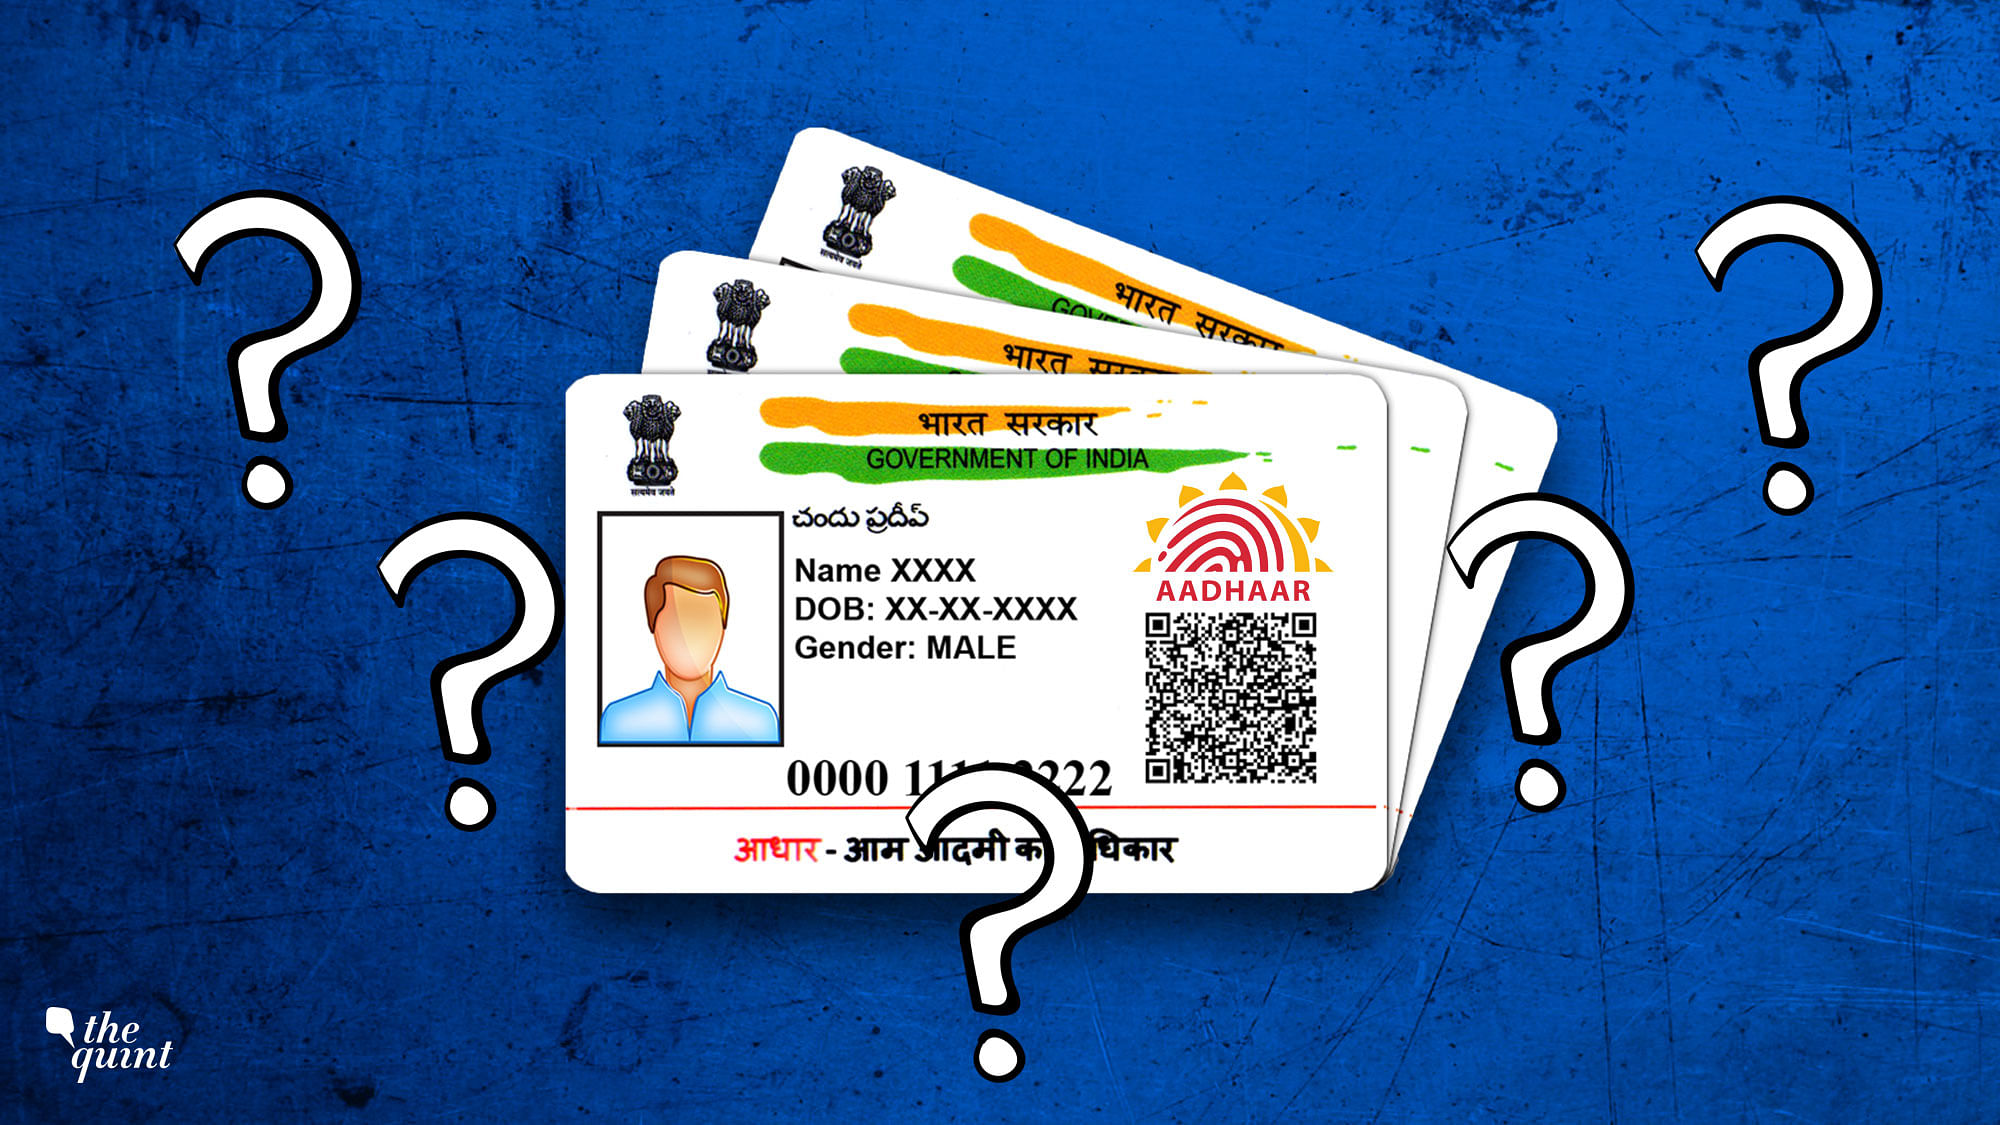 What is an Aadhaar Virtual ID? How and where can it be used?